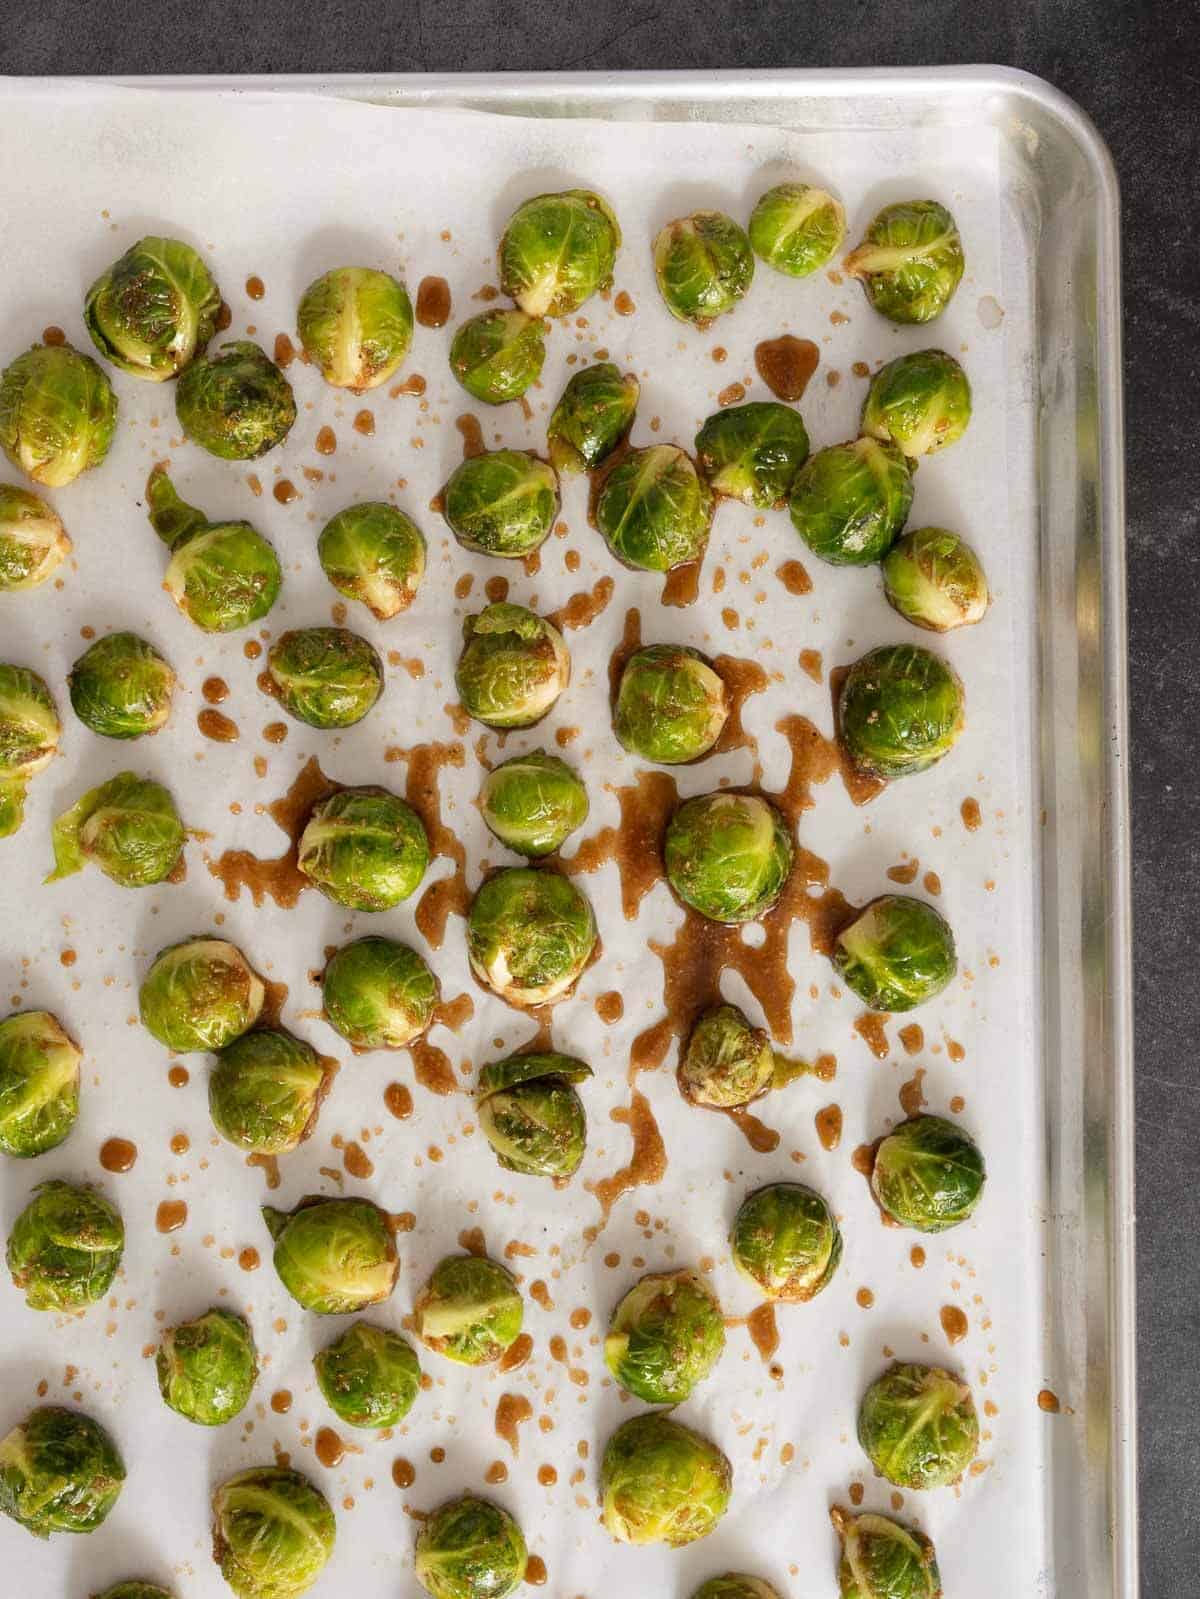 spread the marinated Brussels sprouts evenly on a sheet pan.